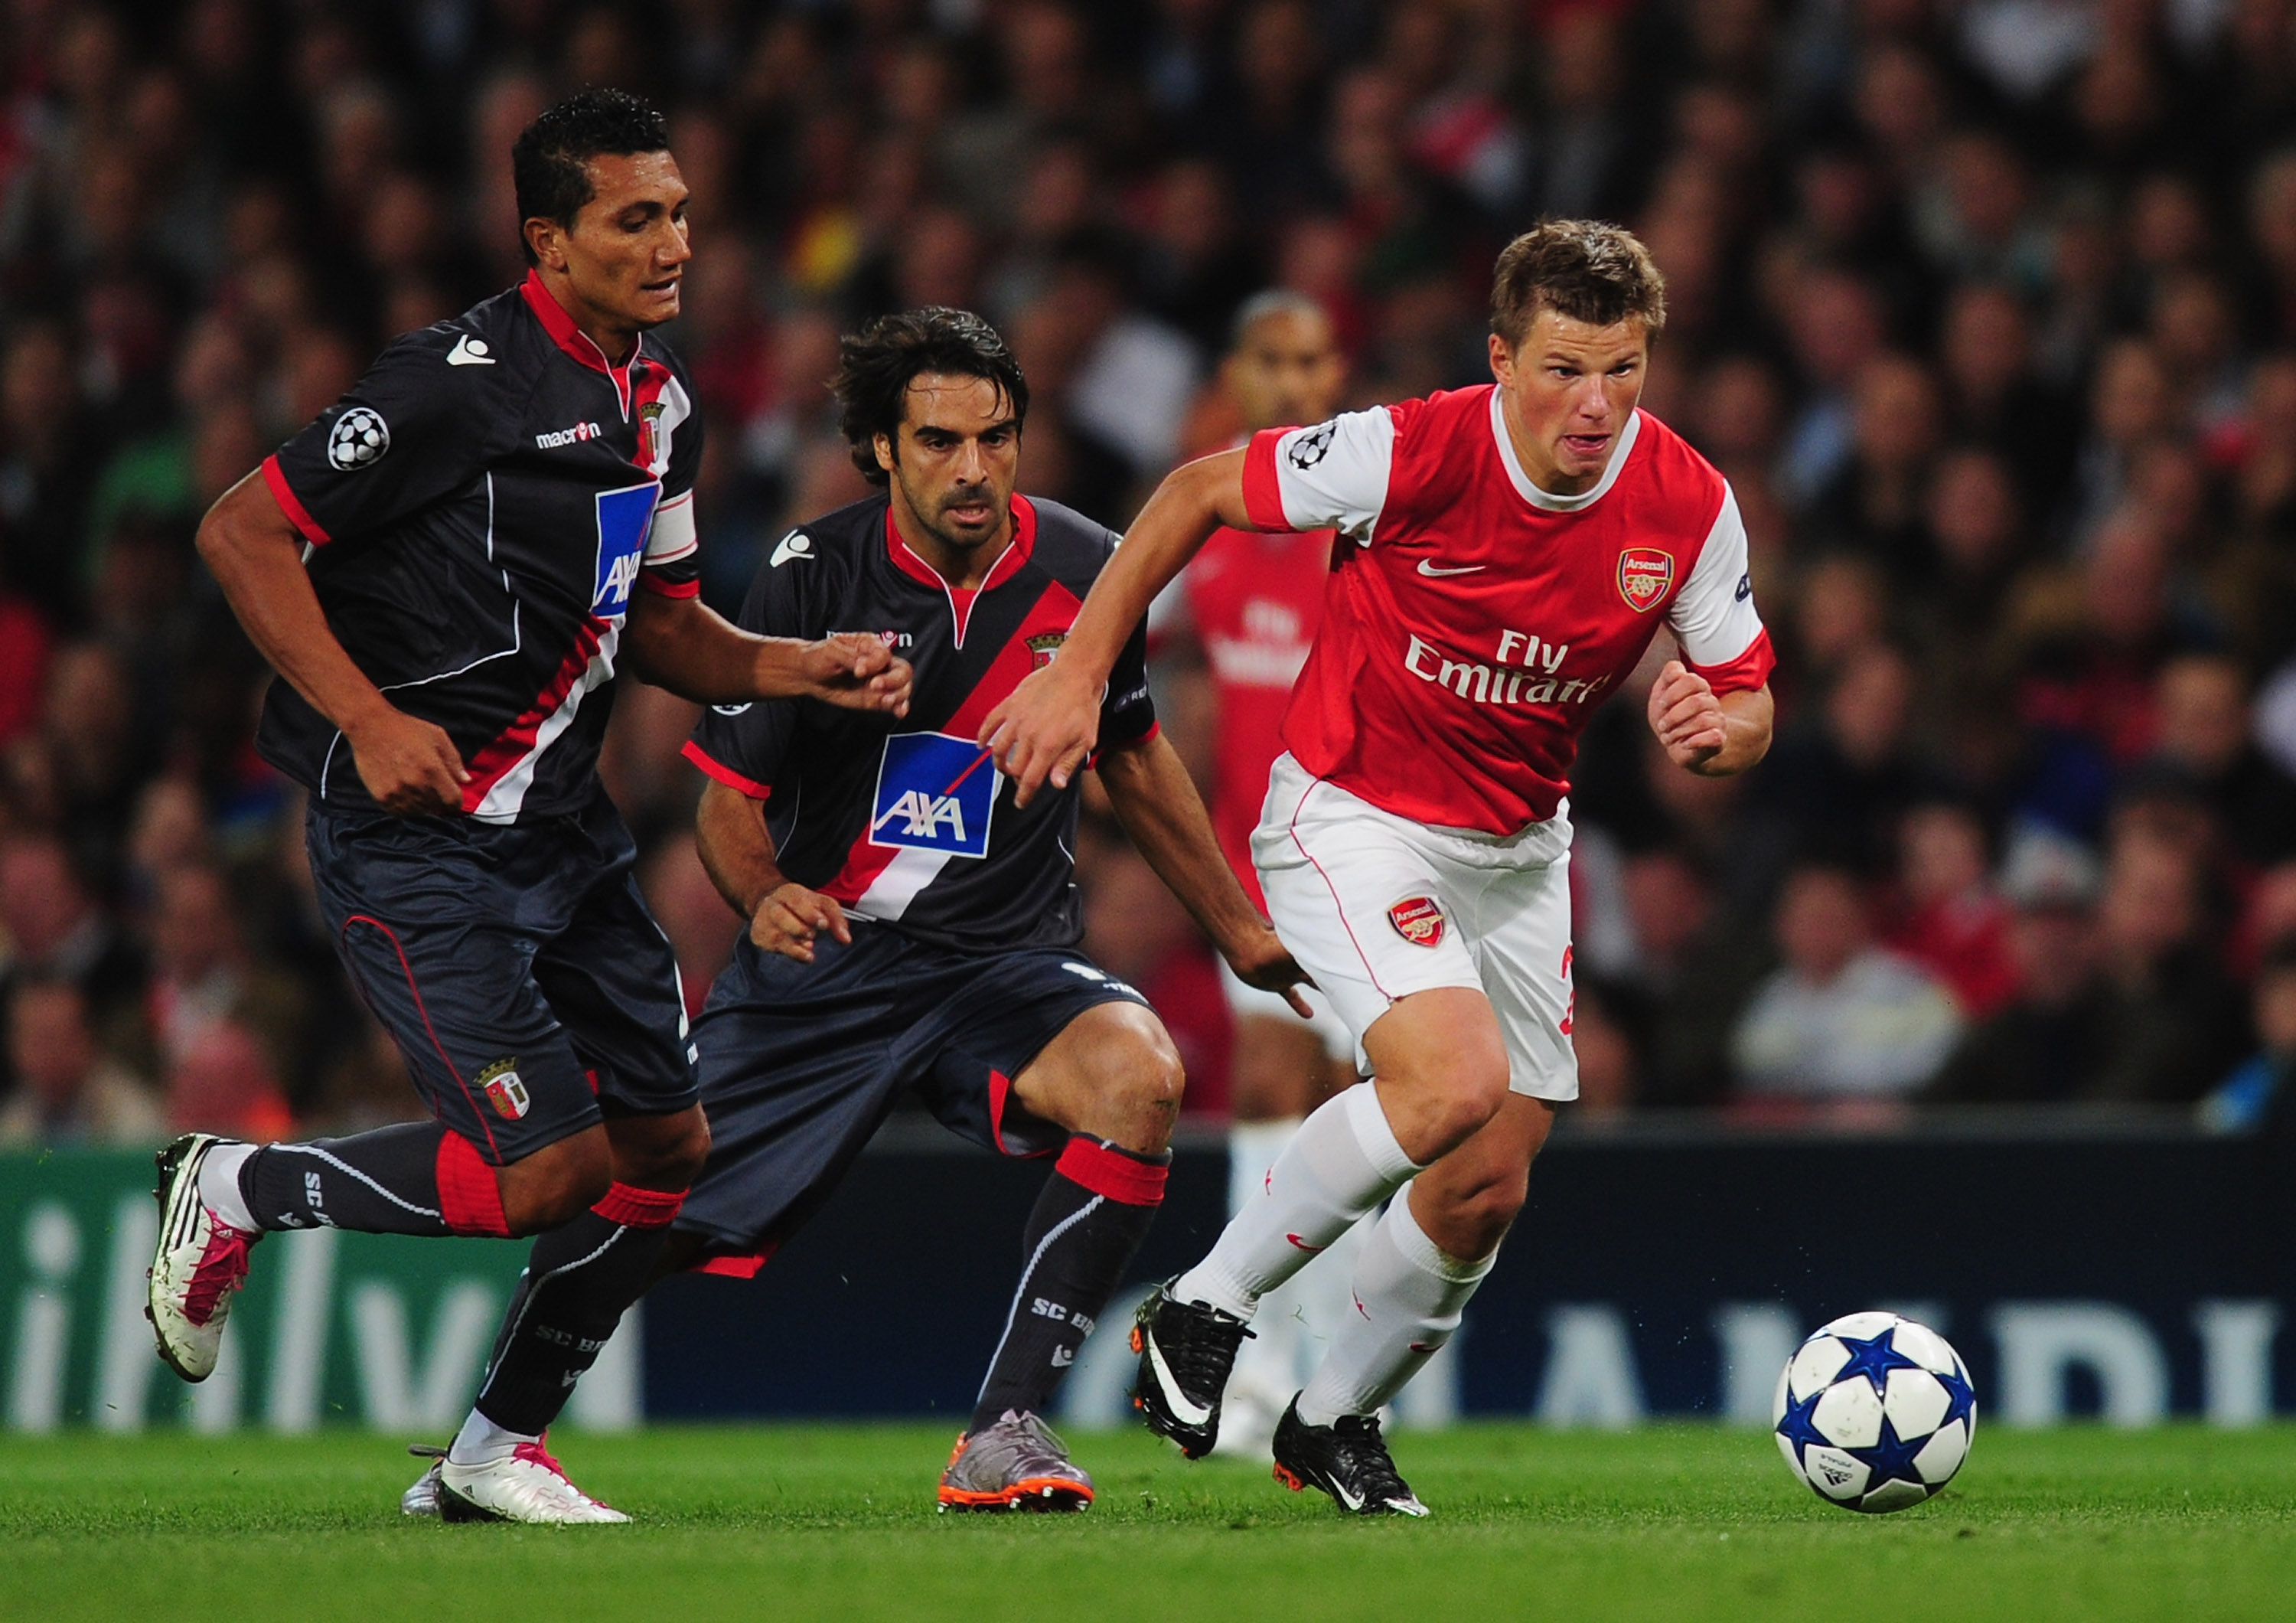 LONDON, ENGLAND - SEPTEMBER 15:  Andrey Arshavin of Arsenal gets away from Vandinho (L) and Miguel Garcia of Braga during the UEFA Champions League Group H match between Arsenal and SC Braga at the Emirates Stadium on September 15, 2010 in London, England